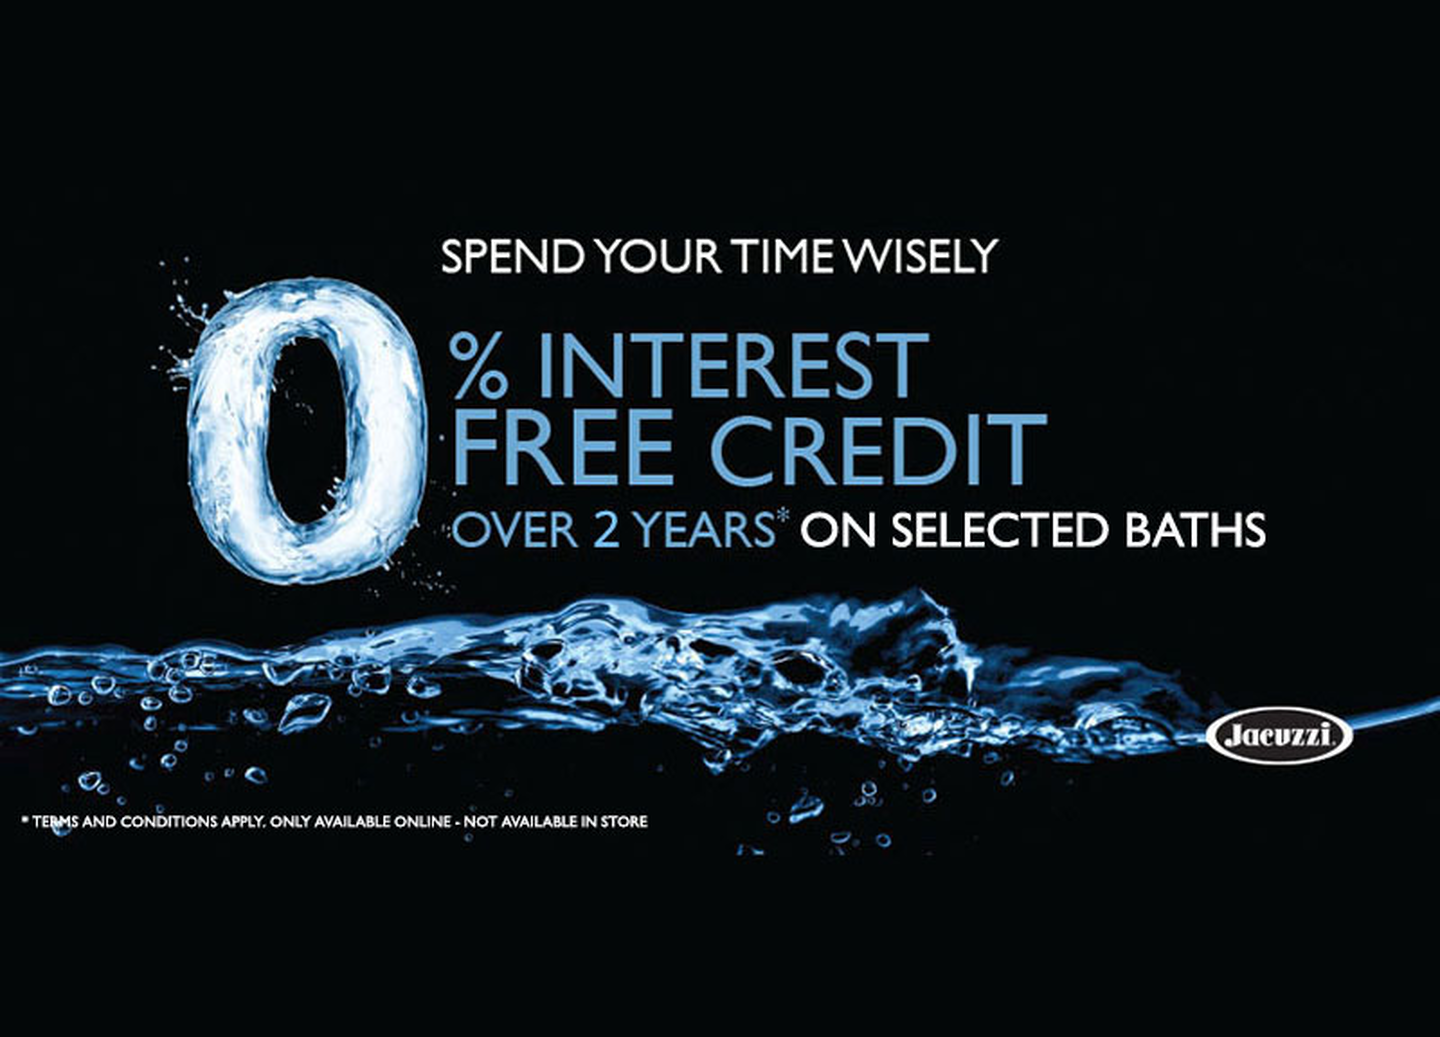 2 years interest free credit on selected baths